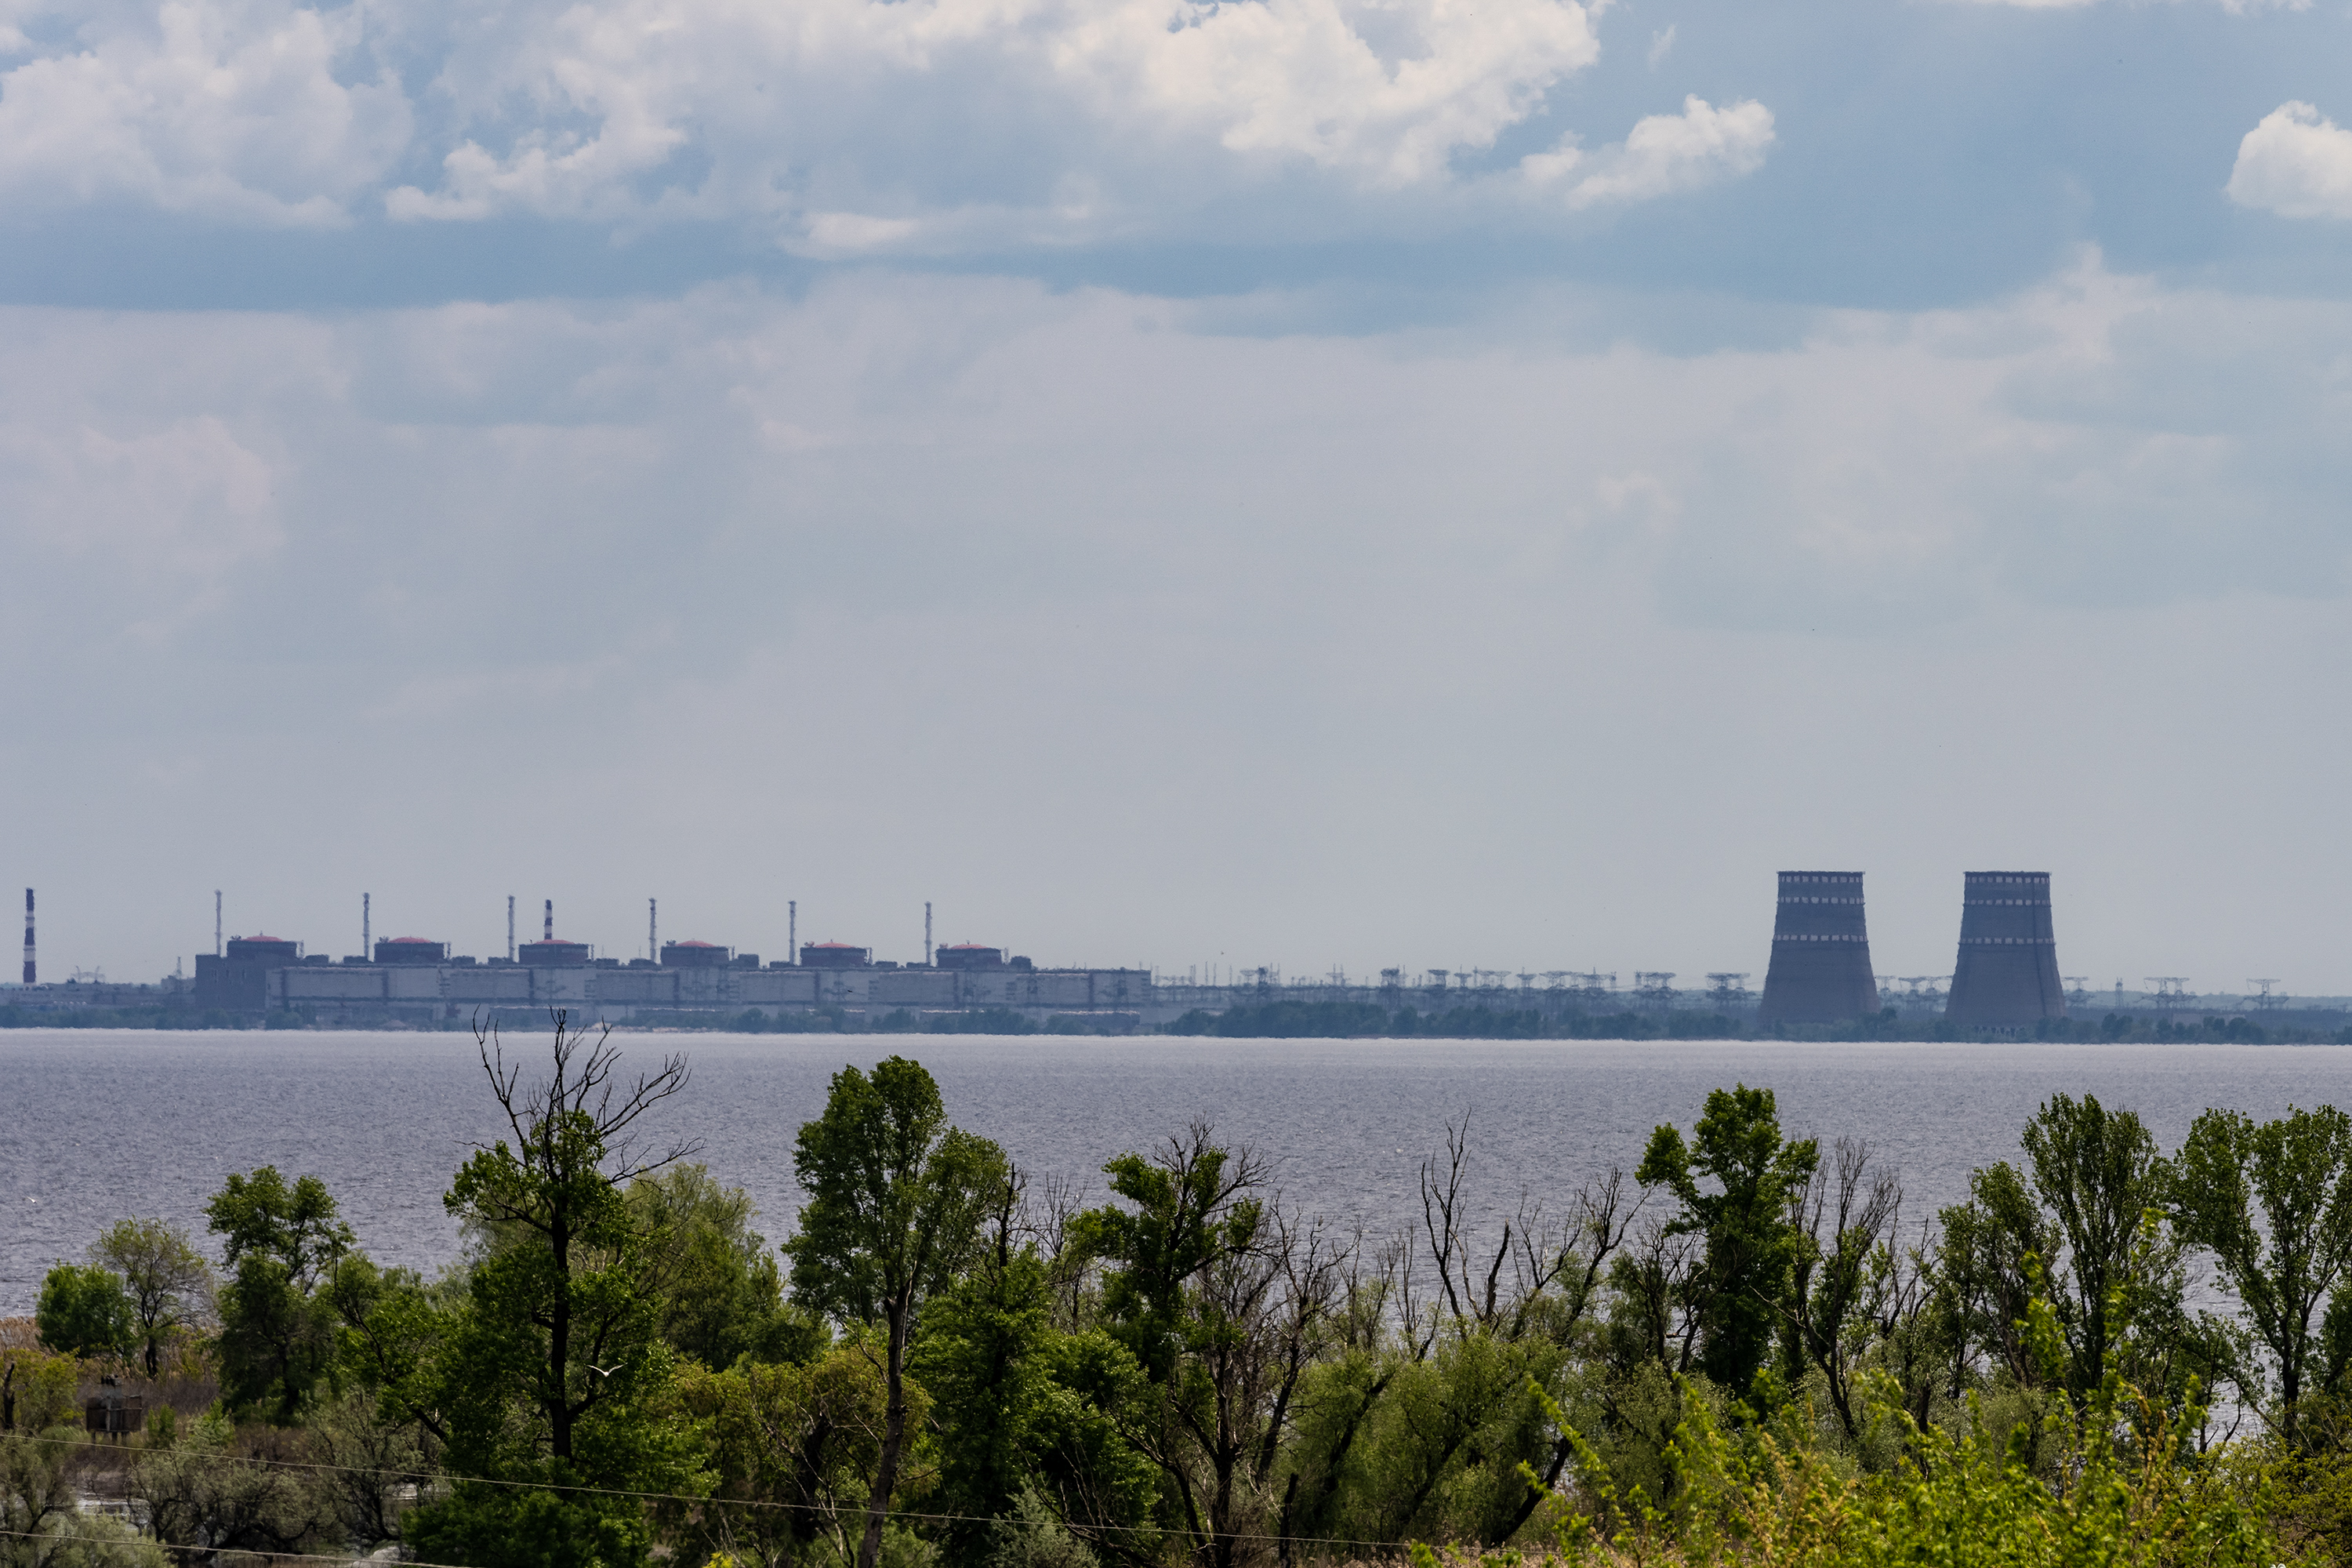 A view of the Zaporizhzhia Nuclear Power Plant from the right bank of the Dnipro river in Enerhodar, on Sunday.